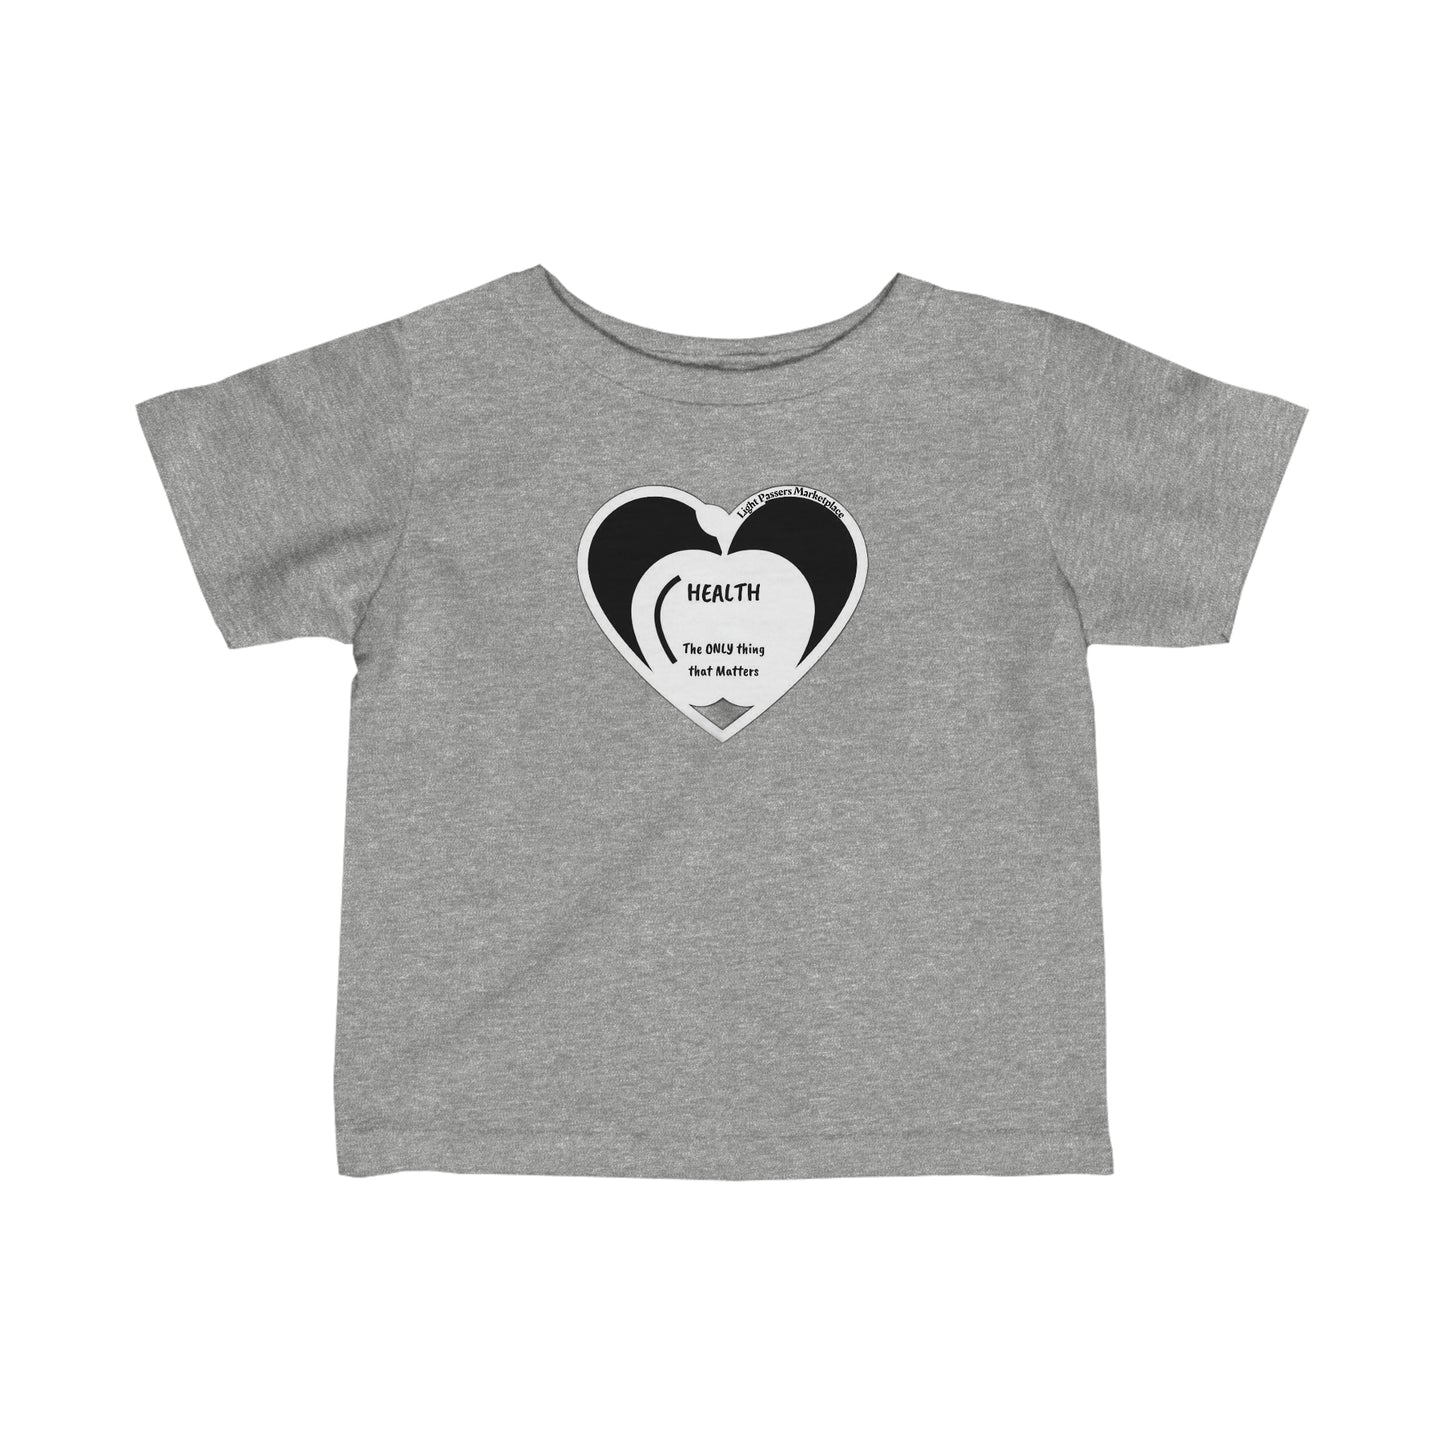 Infant fine jersey tee with heart graphic, side seams, ribbed knitting, and taped shoulders for durability and comfort. 100% Combed ringspun cotton, light fabric, classic fit. Apple Health Infant T-shirts Baby.